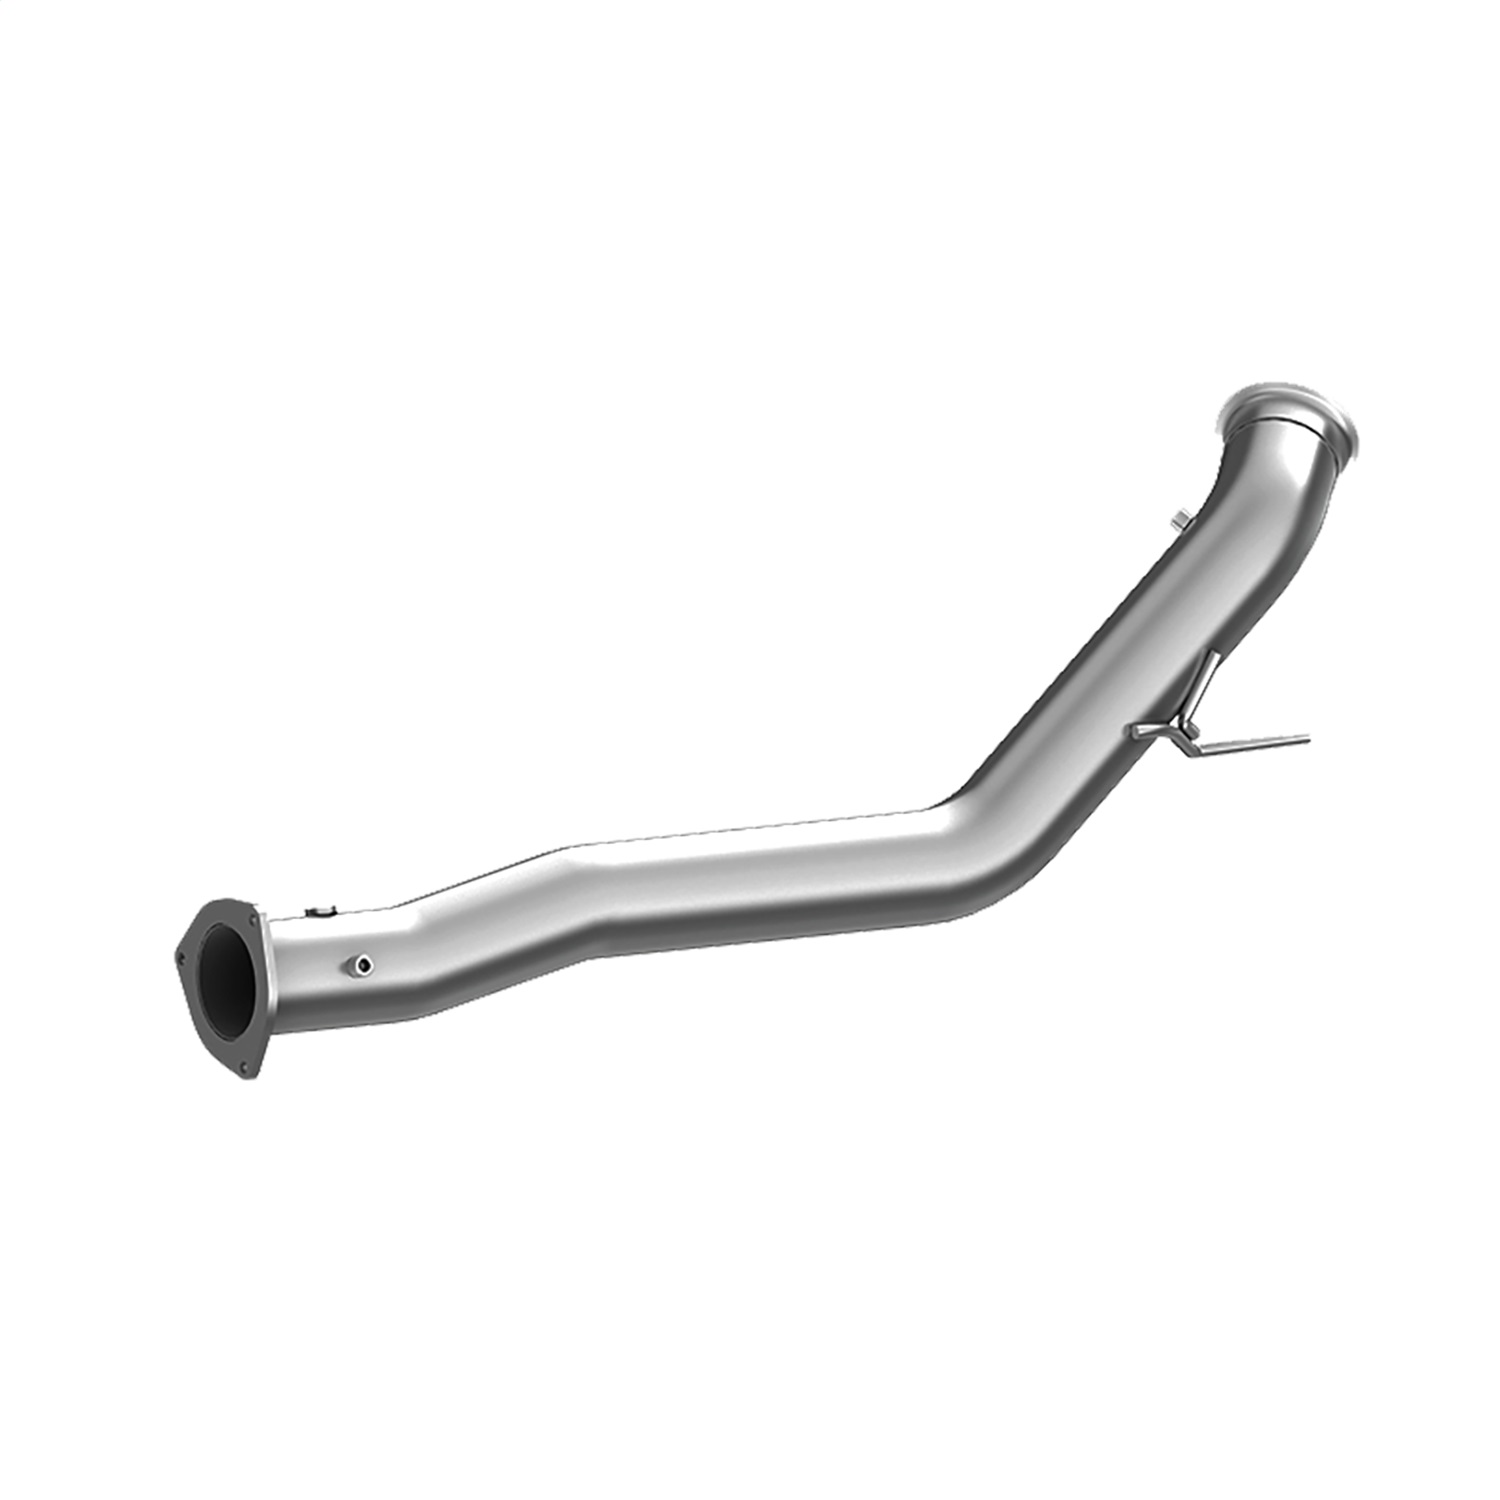 MBRP Exhaust MBRP Exhaust DAL435 Down Pipe Fits 10-12 2500 3500 Ram 2500 Ram 3500